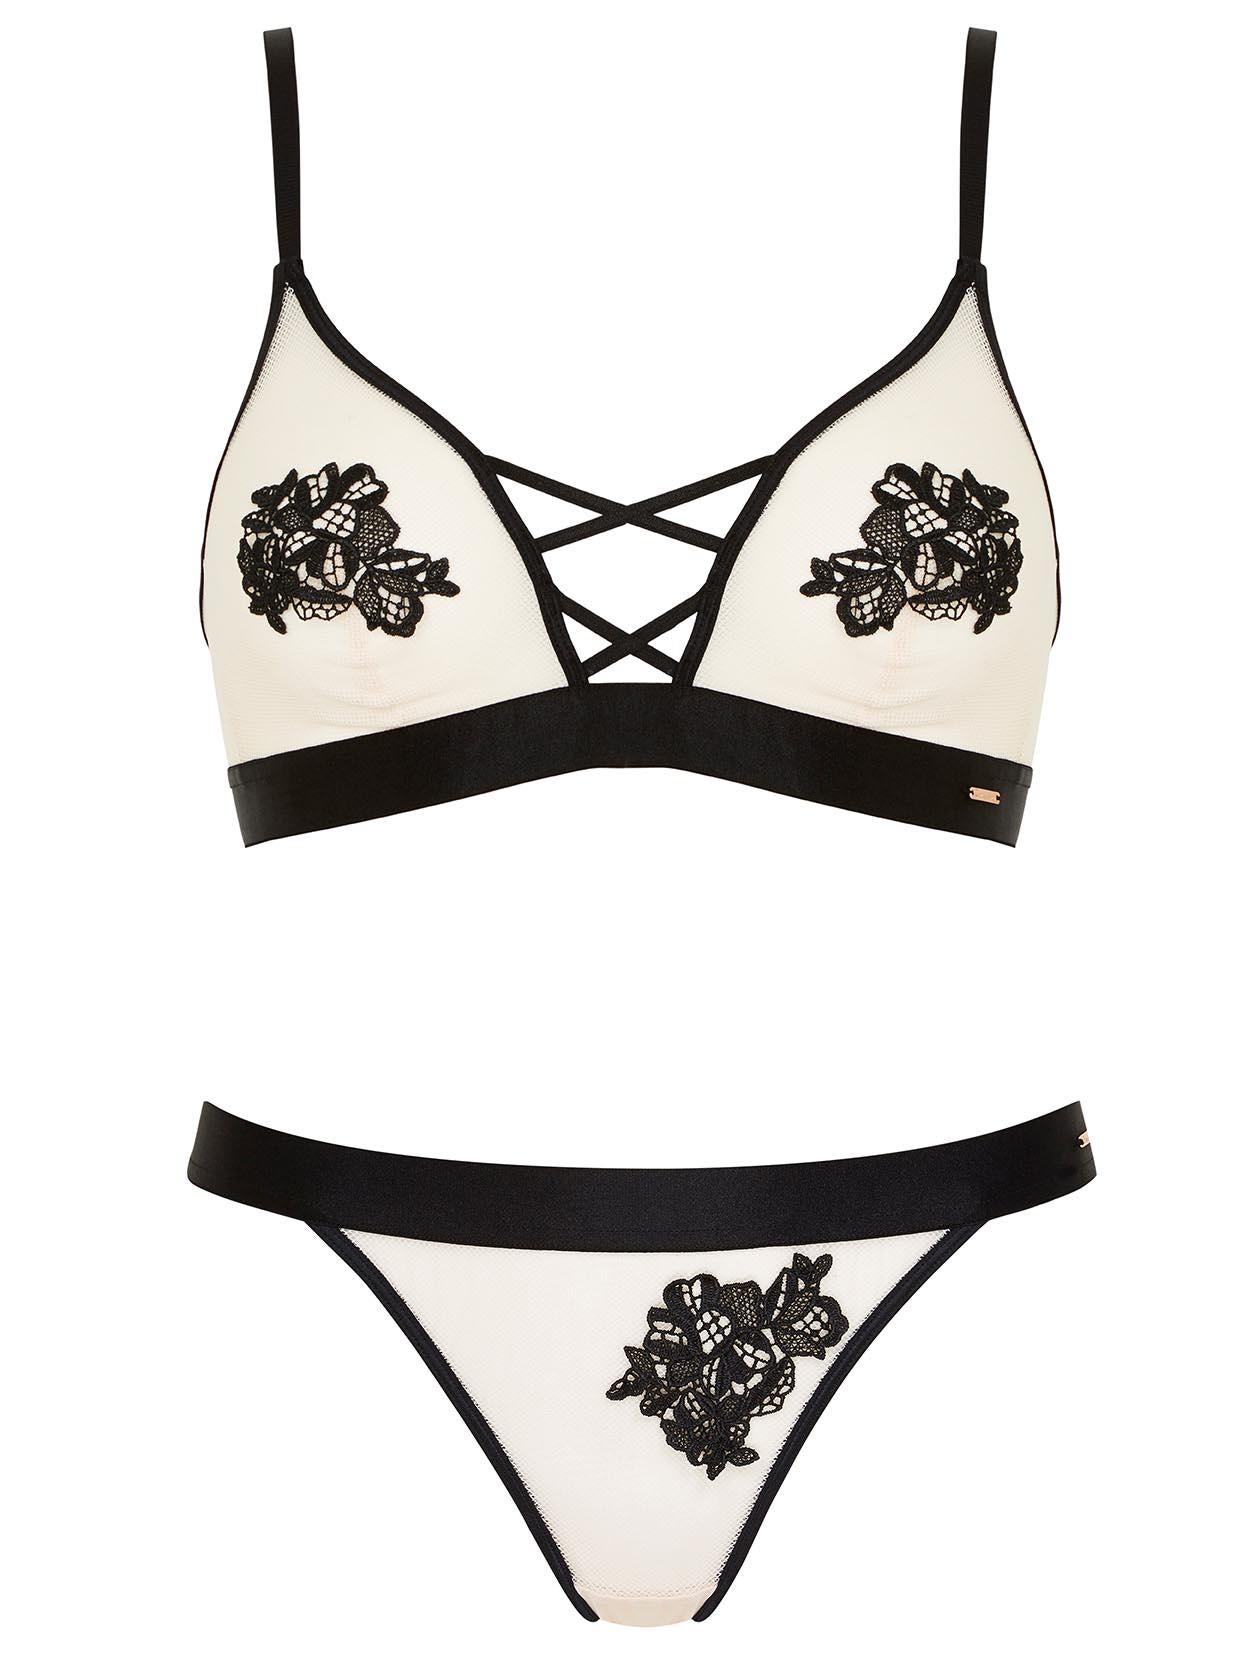 Celebrate national underwear day with the best lingerie for your shape, The Independent